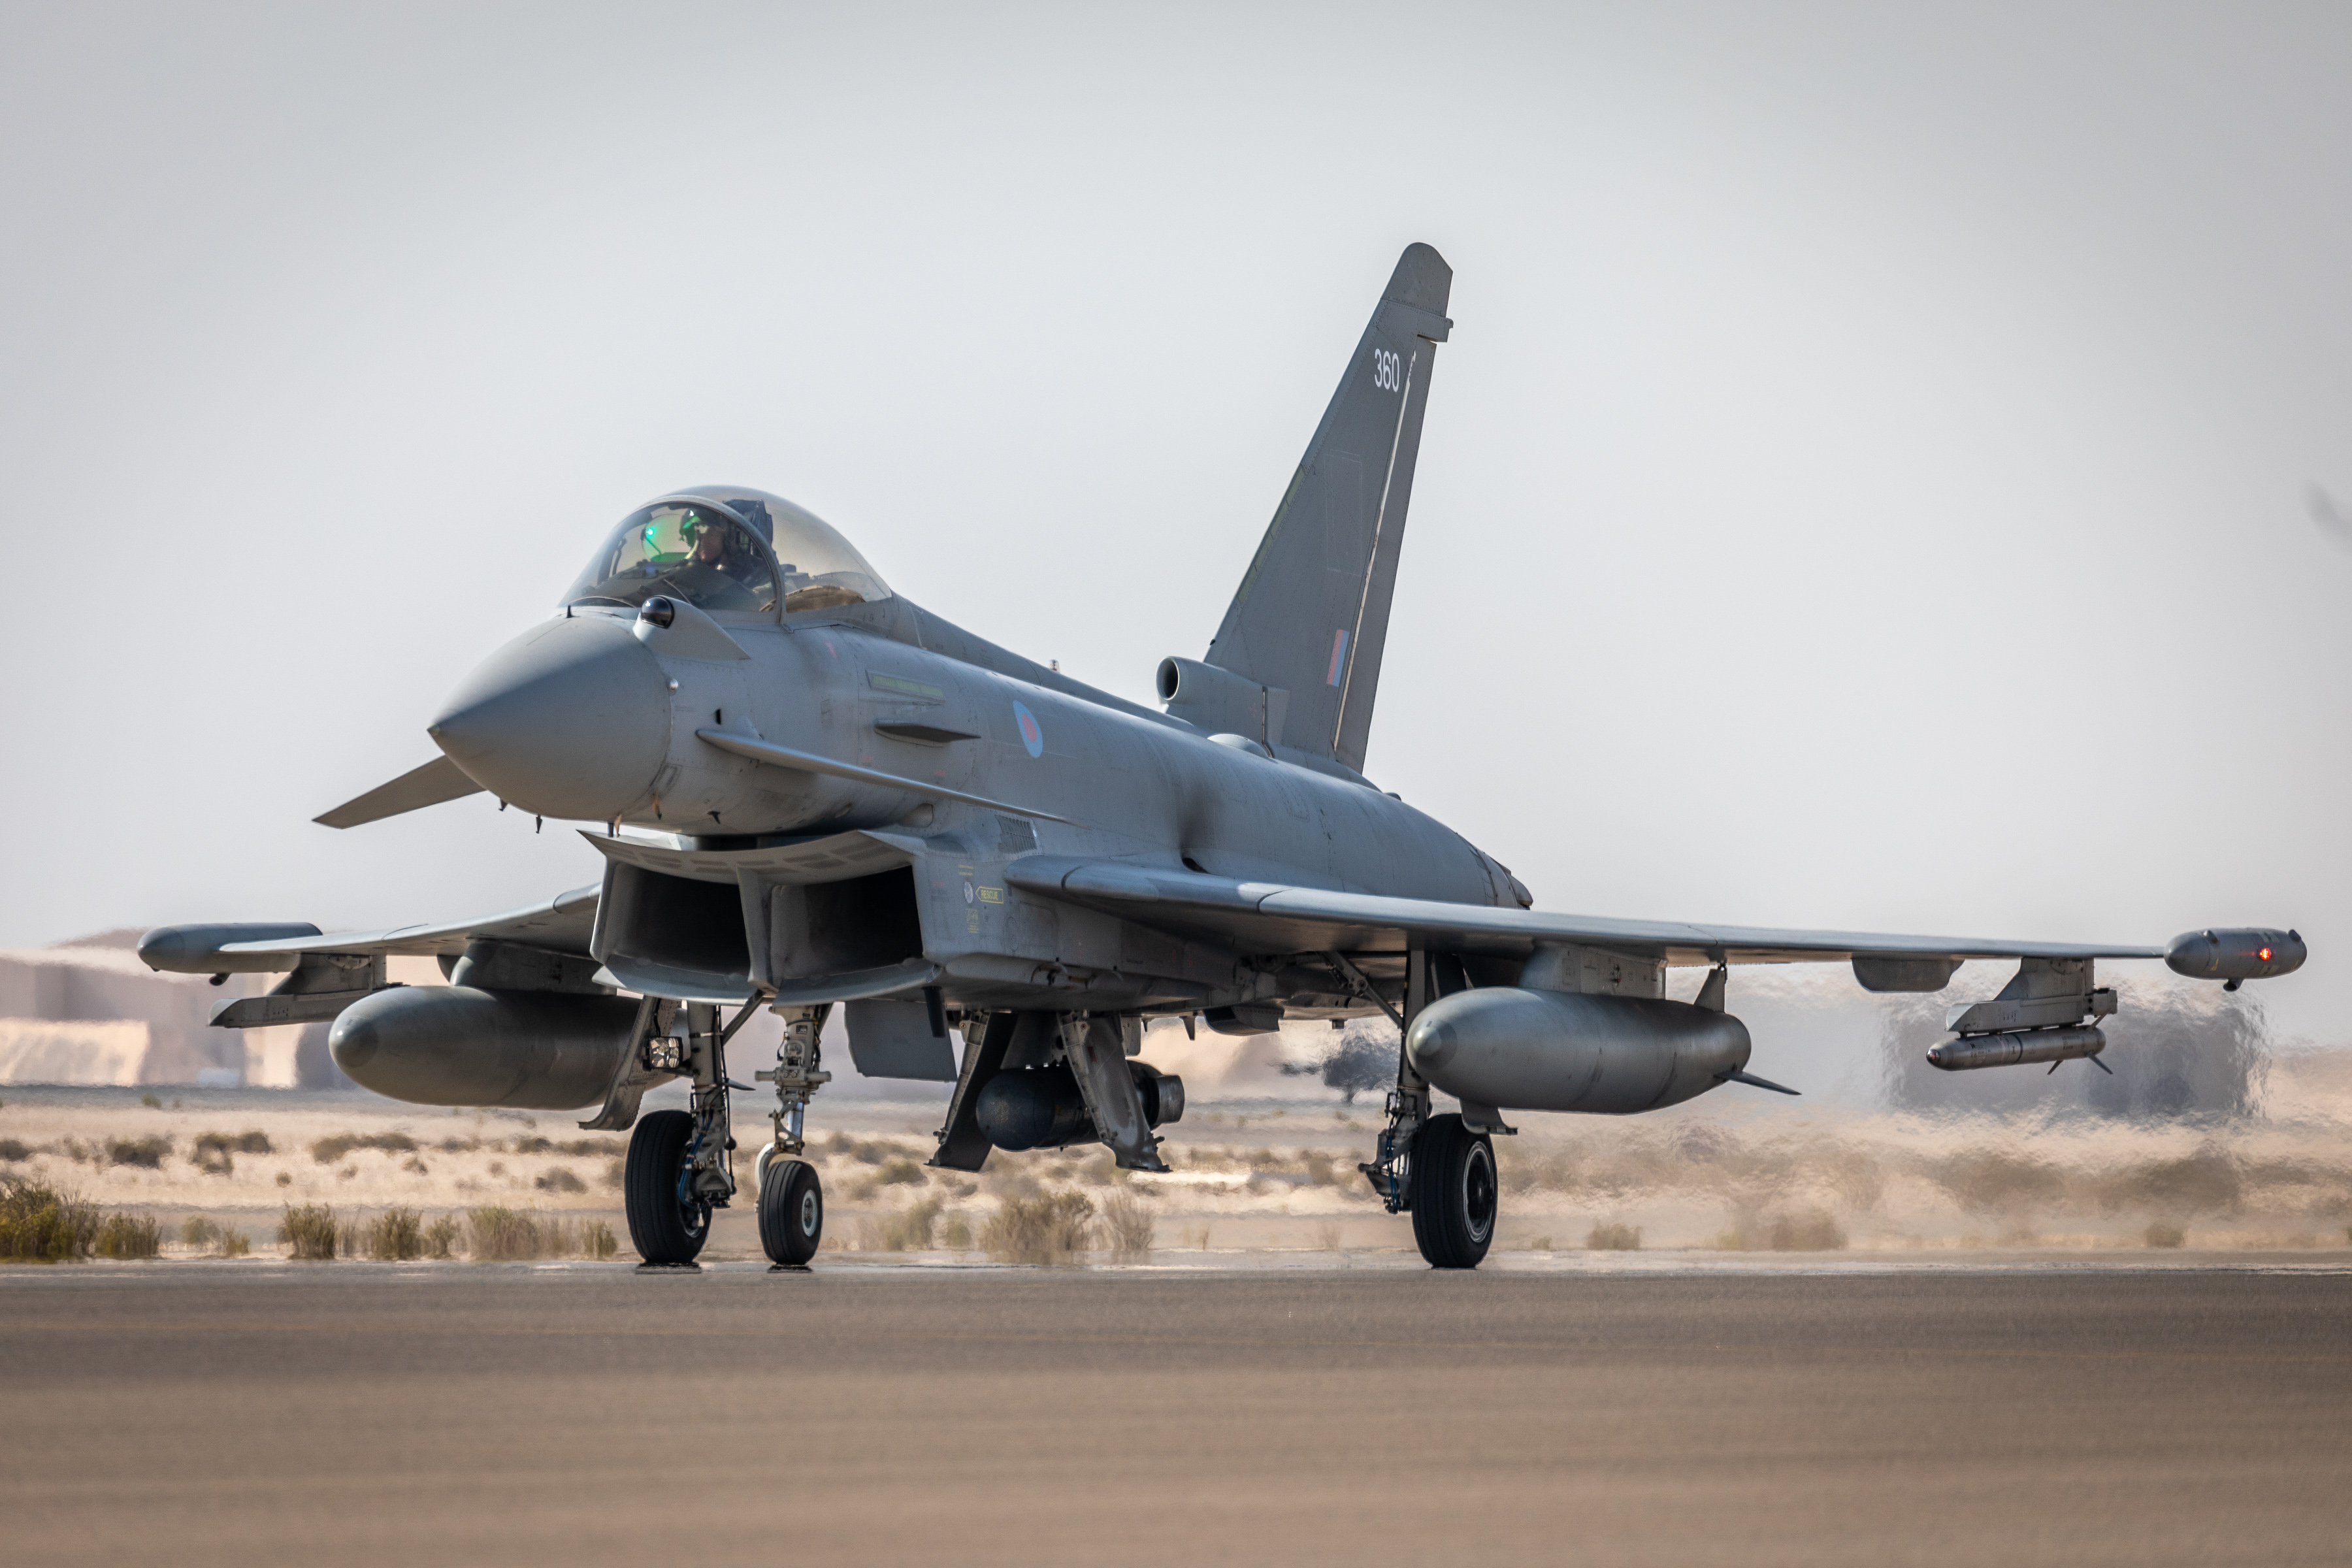 Image shows RAF Typhoon taxxing on the airfield